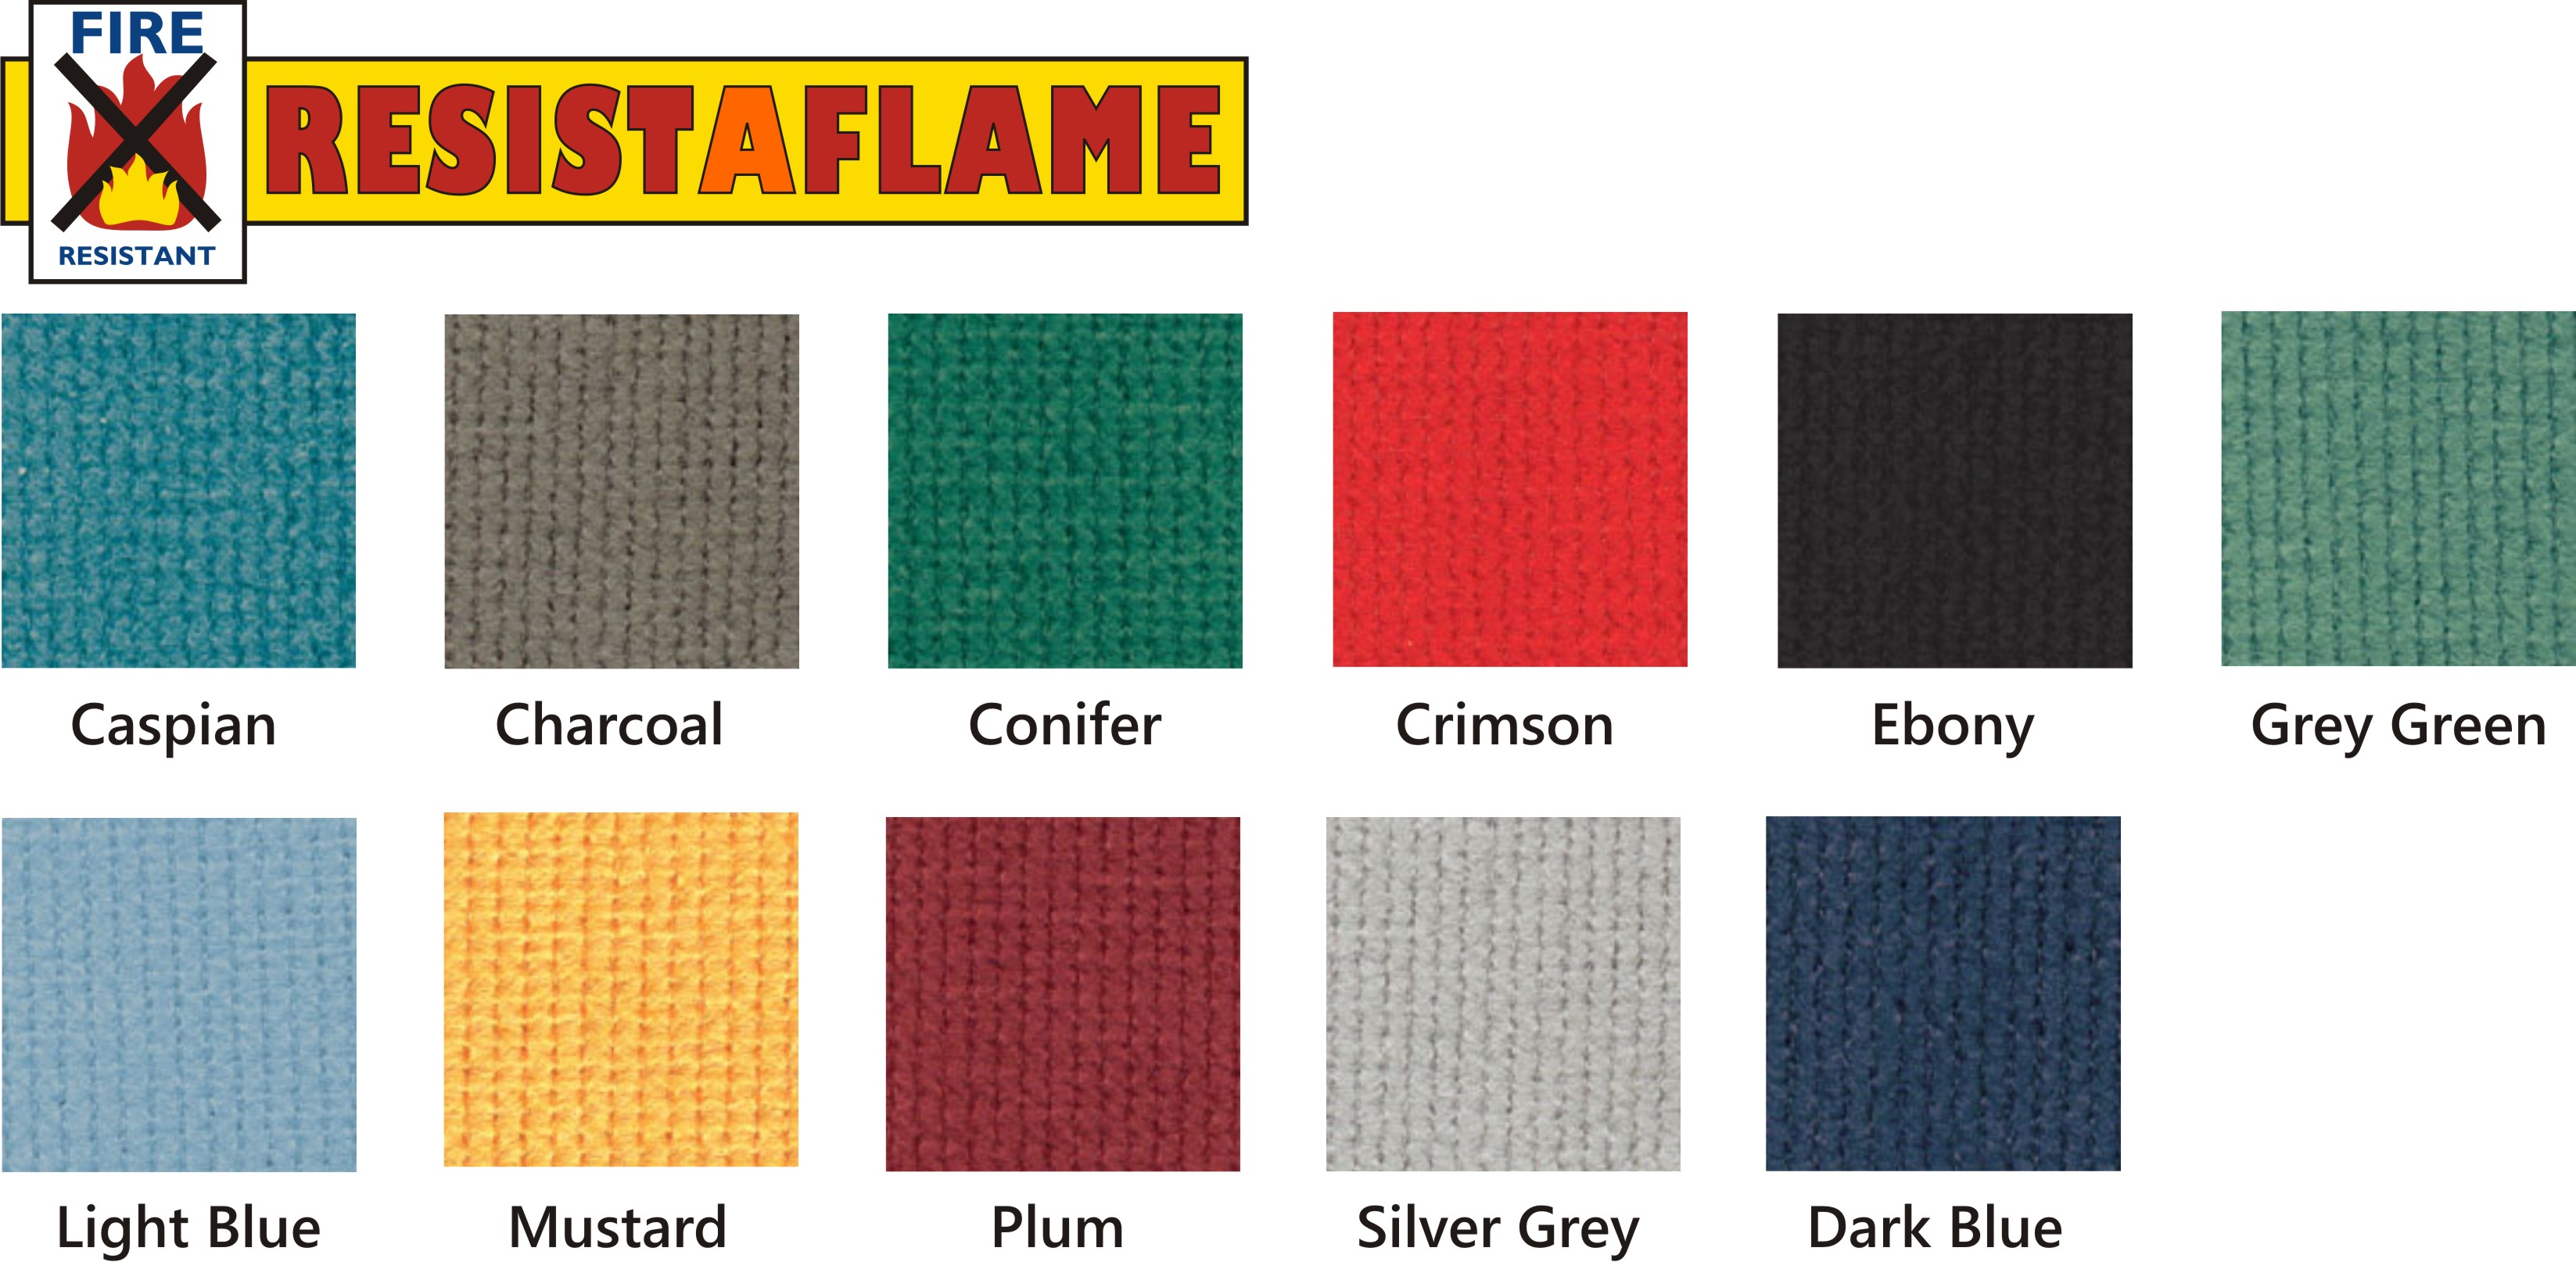 Resisst-A-Flame Fire Retardant Noticeboards